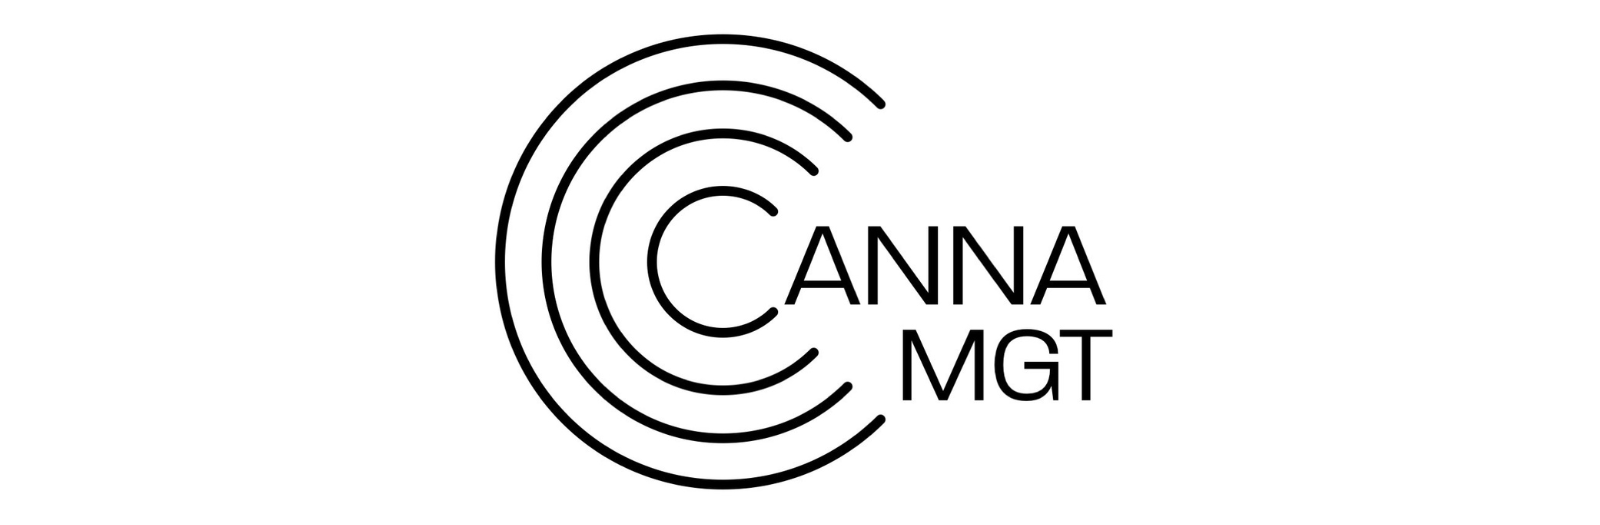 Cannabis Ancillary Services-Cannabis Service Providers Networking Event